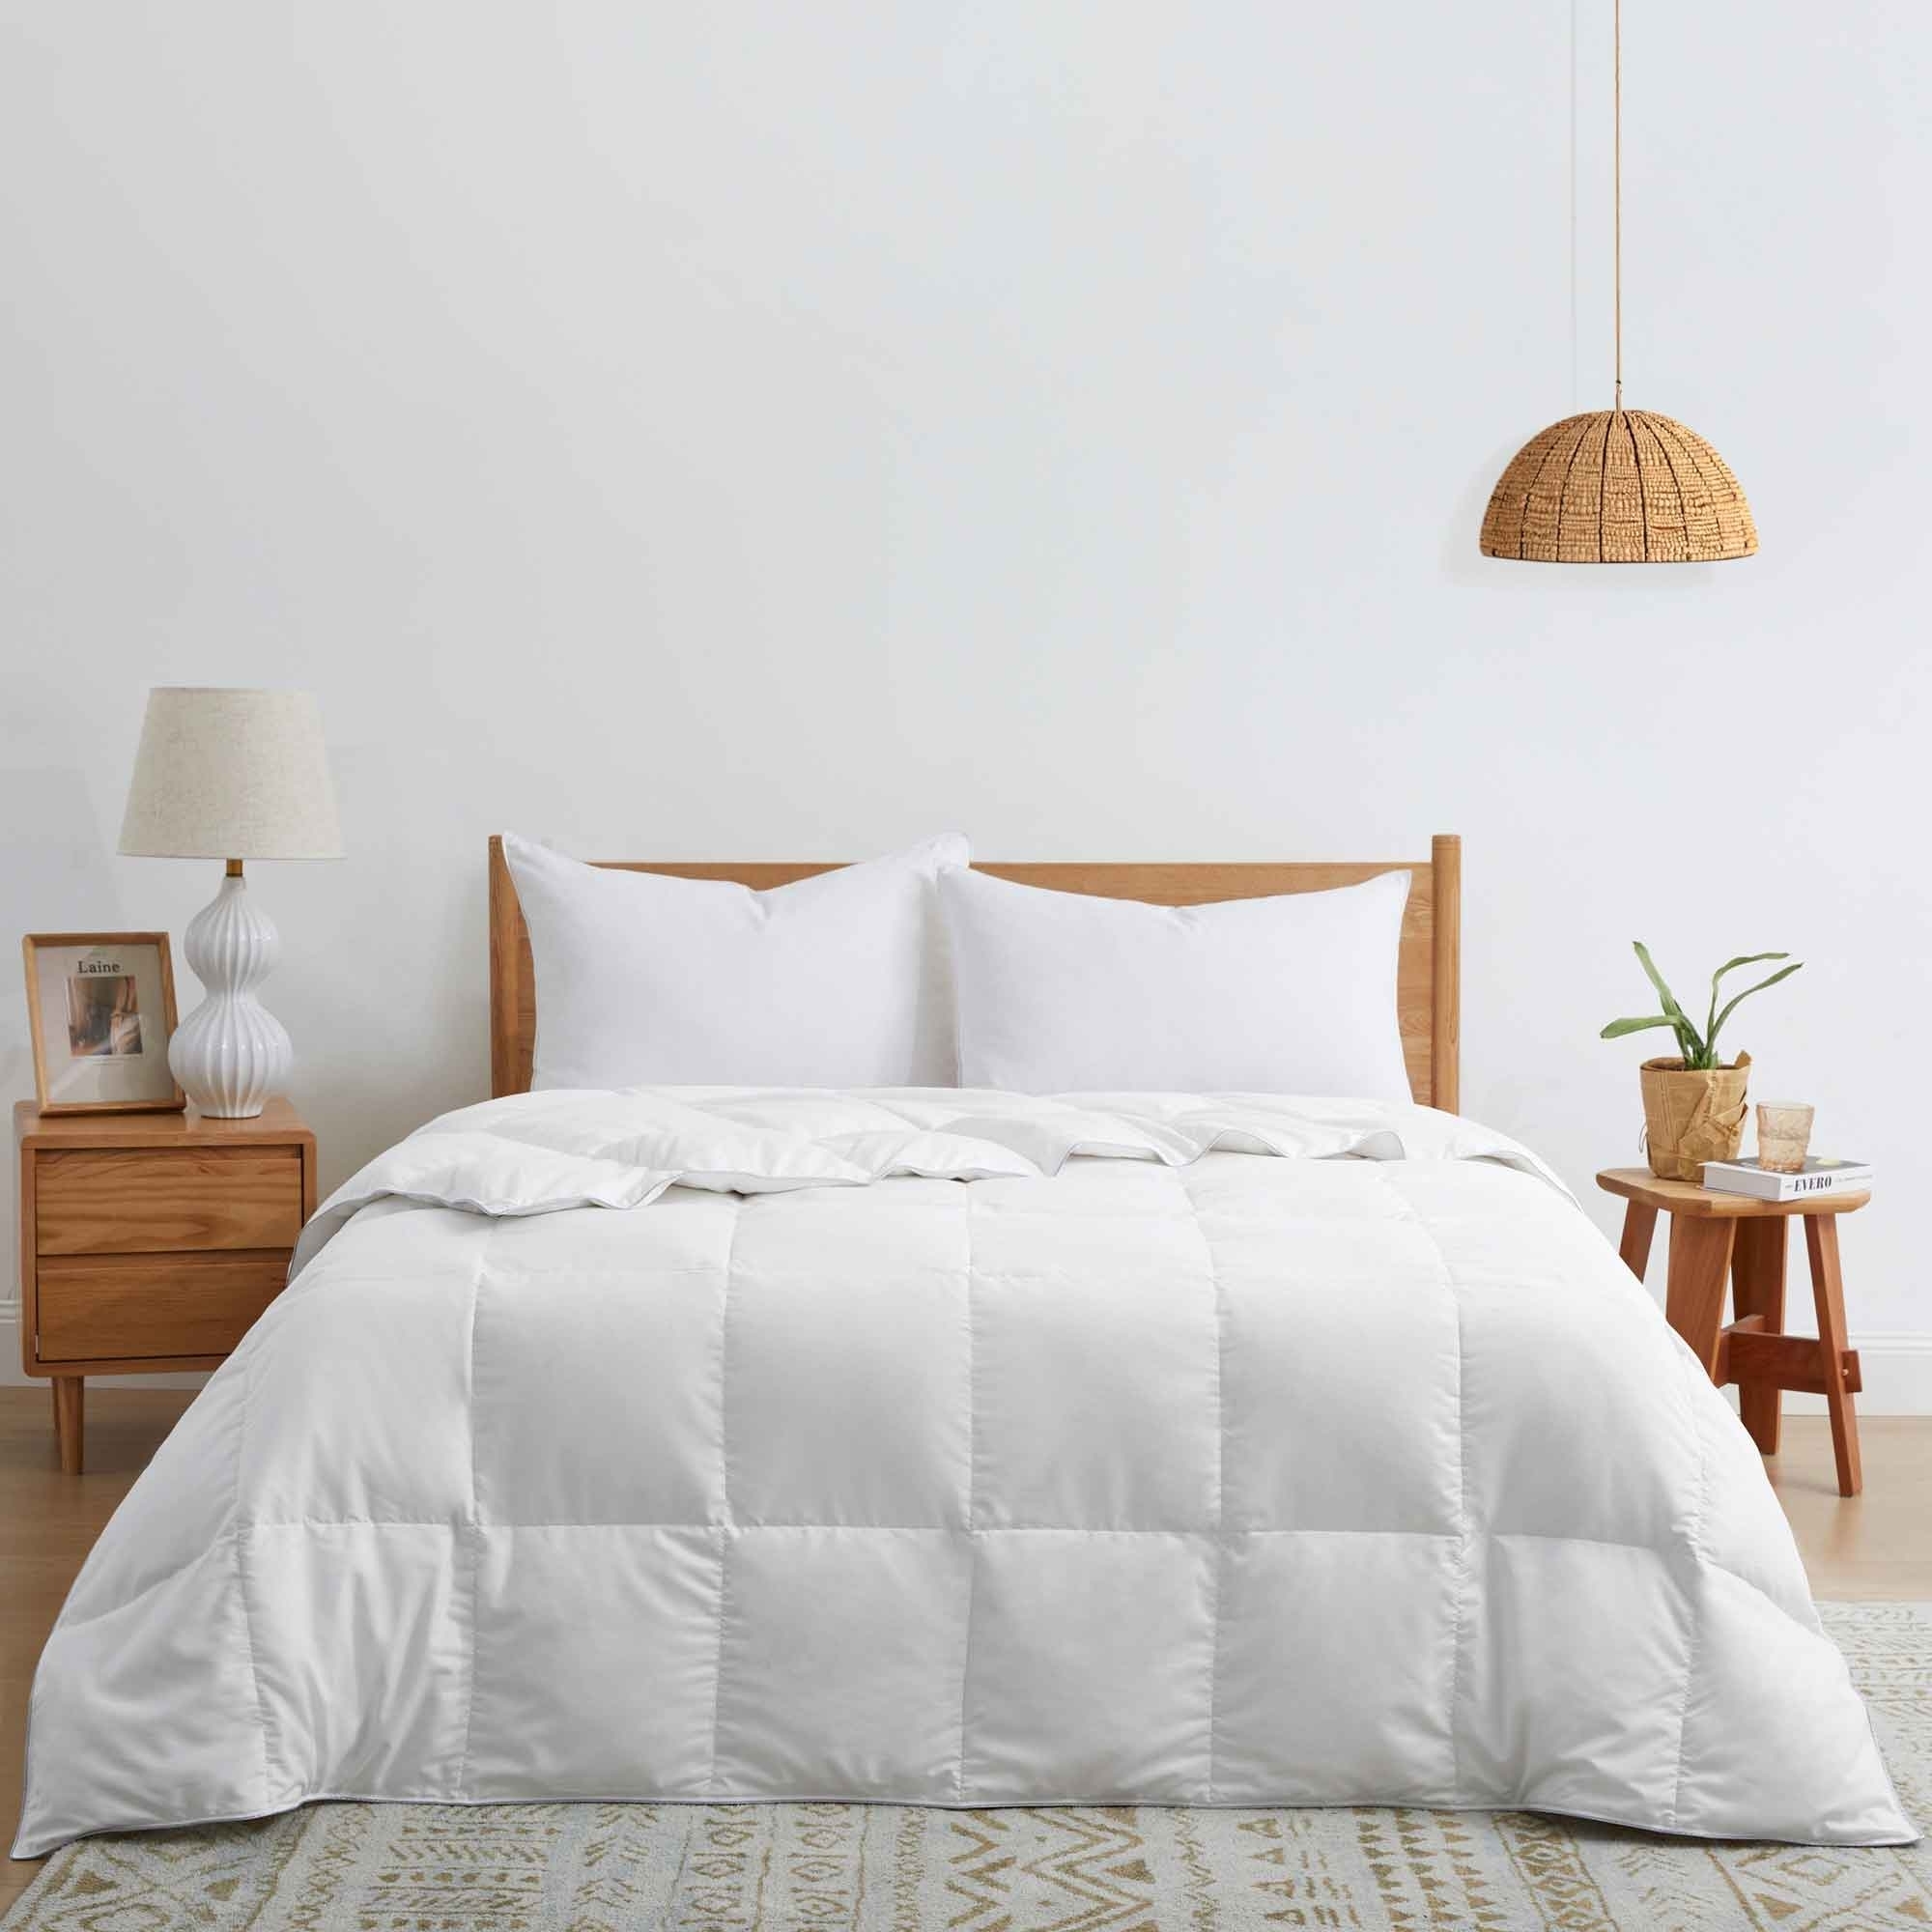 Lightweight Goose Feather And Down Comforter- Hotel Collection For Hot Sleepers - Ginger Root, King